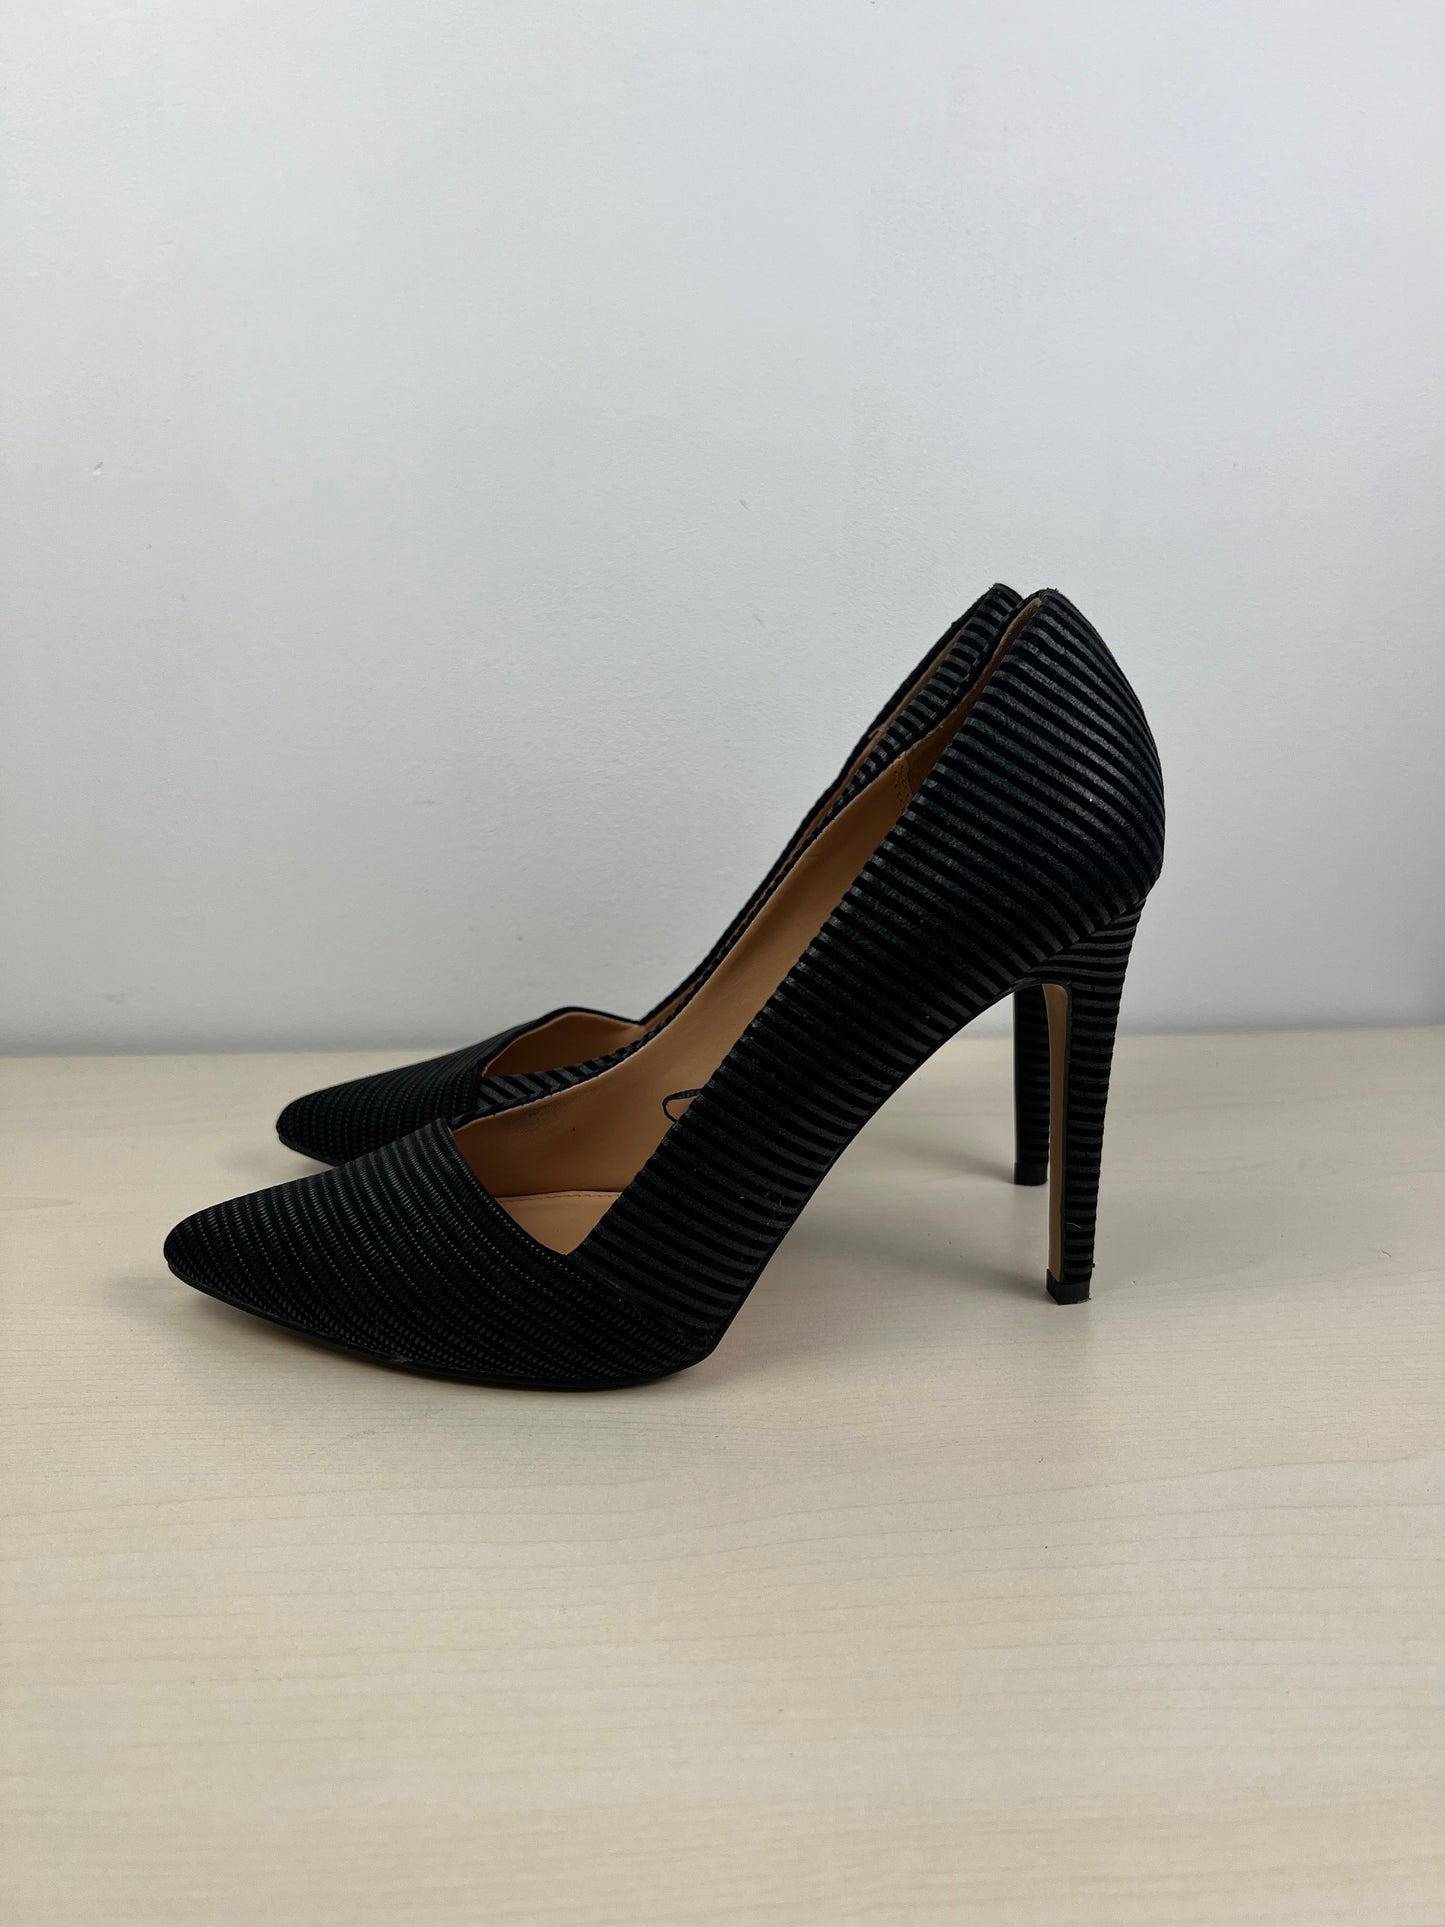 Shoes Heels Stiletto By Express  Size: 10